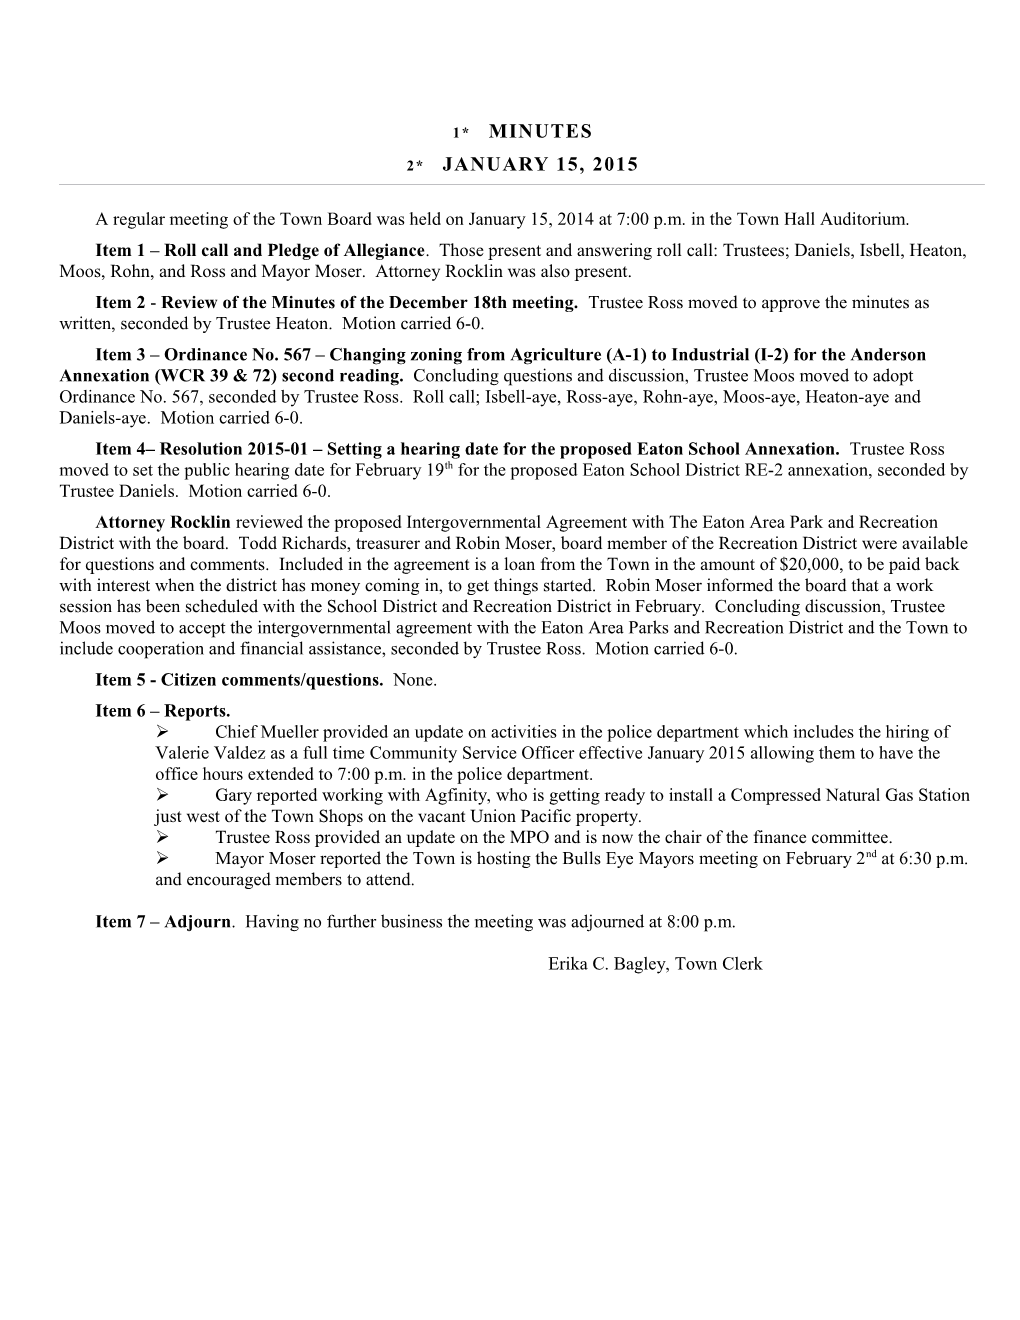 A Regular Meeting of the Town Board Was Held on January15, 2014 at 7:00 P.M. in the Town